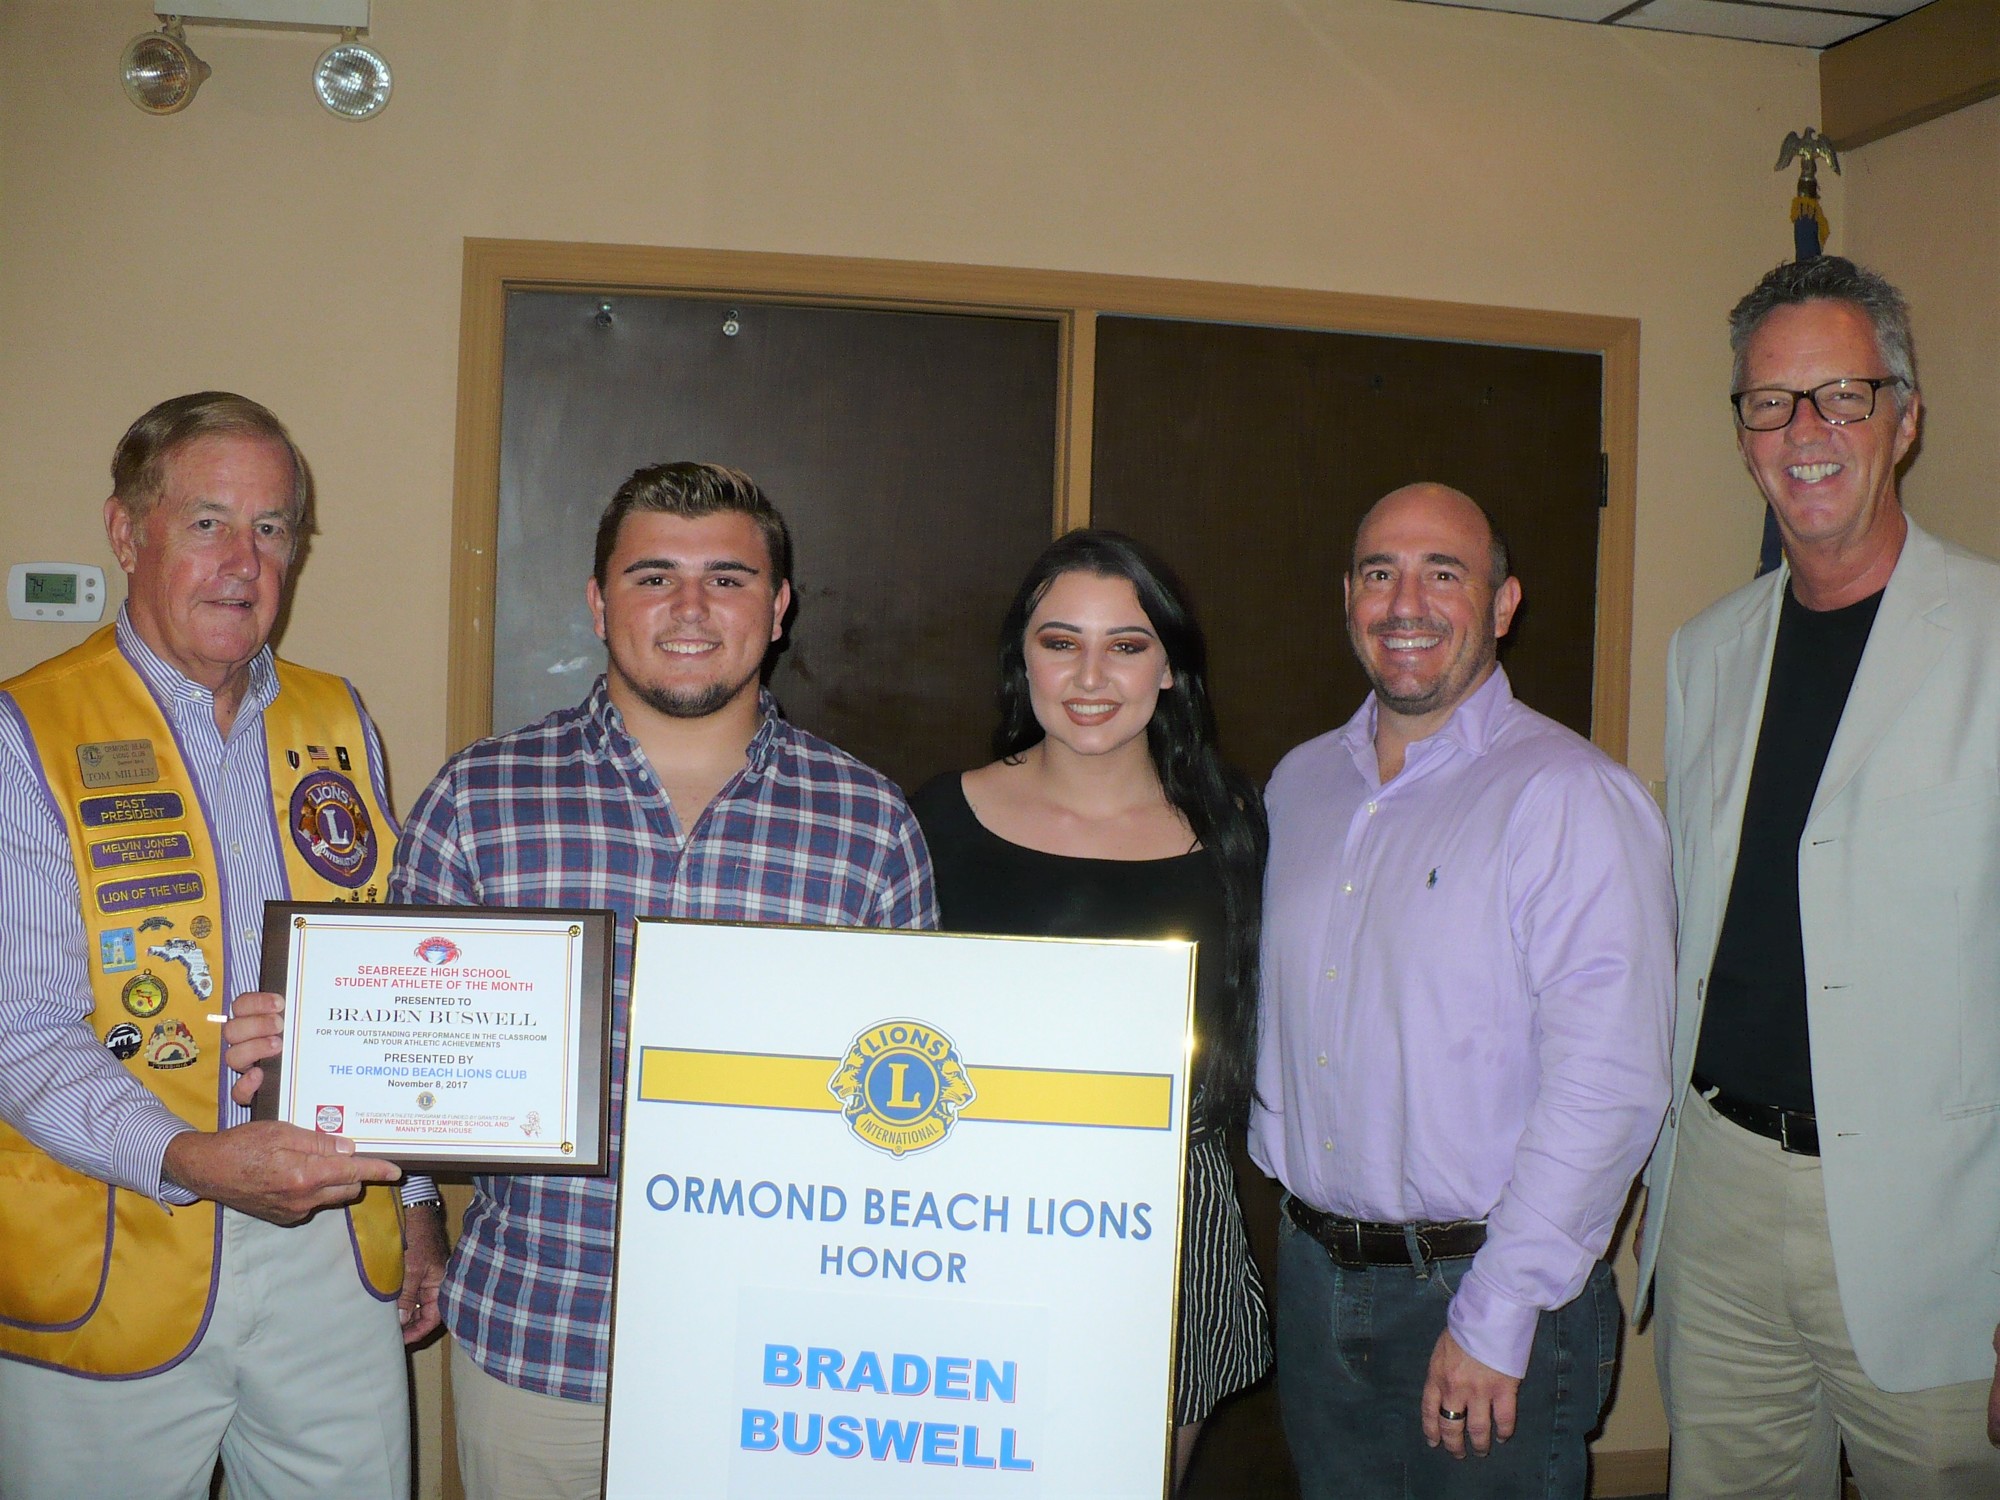 First Vice President Tom Millen, Braden Buswell and Brittany, Steve Buswell and Principal Joe Rawlings. Photo courtesy of the Lions Club